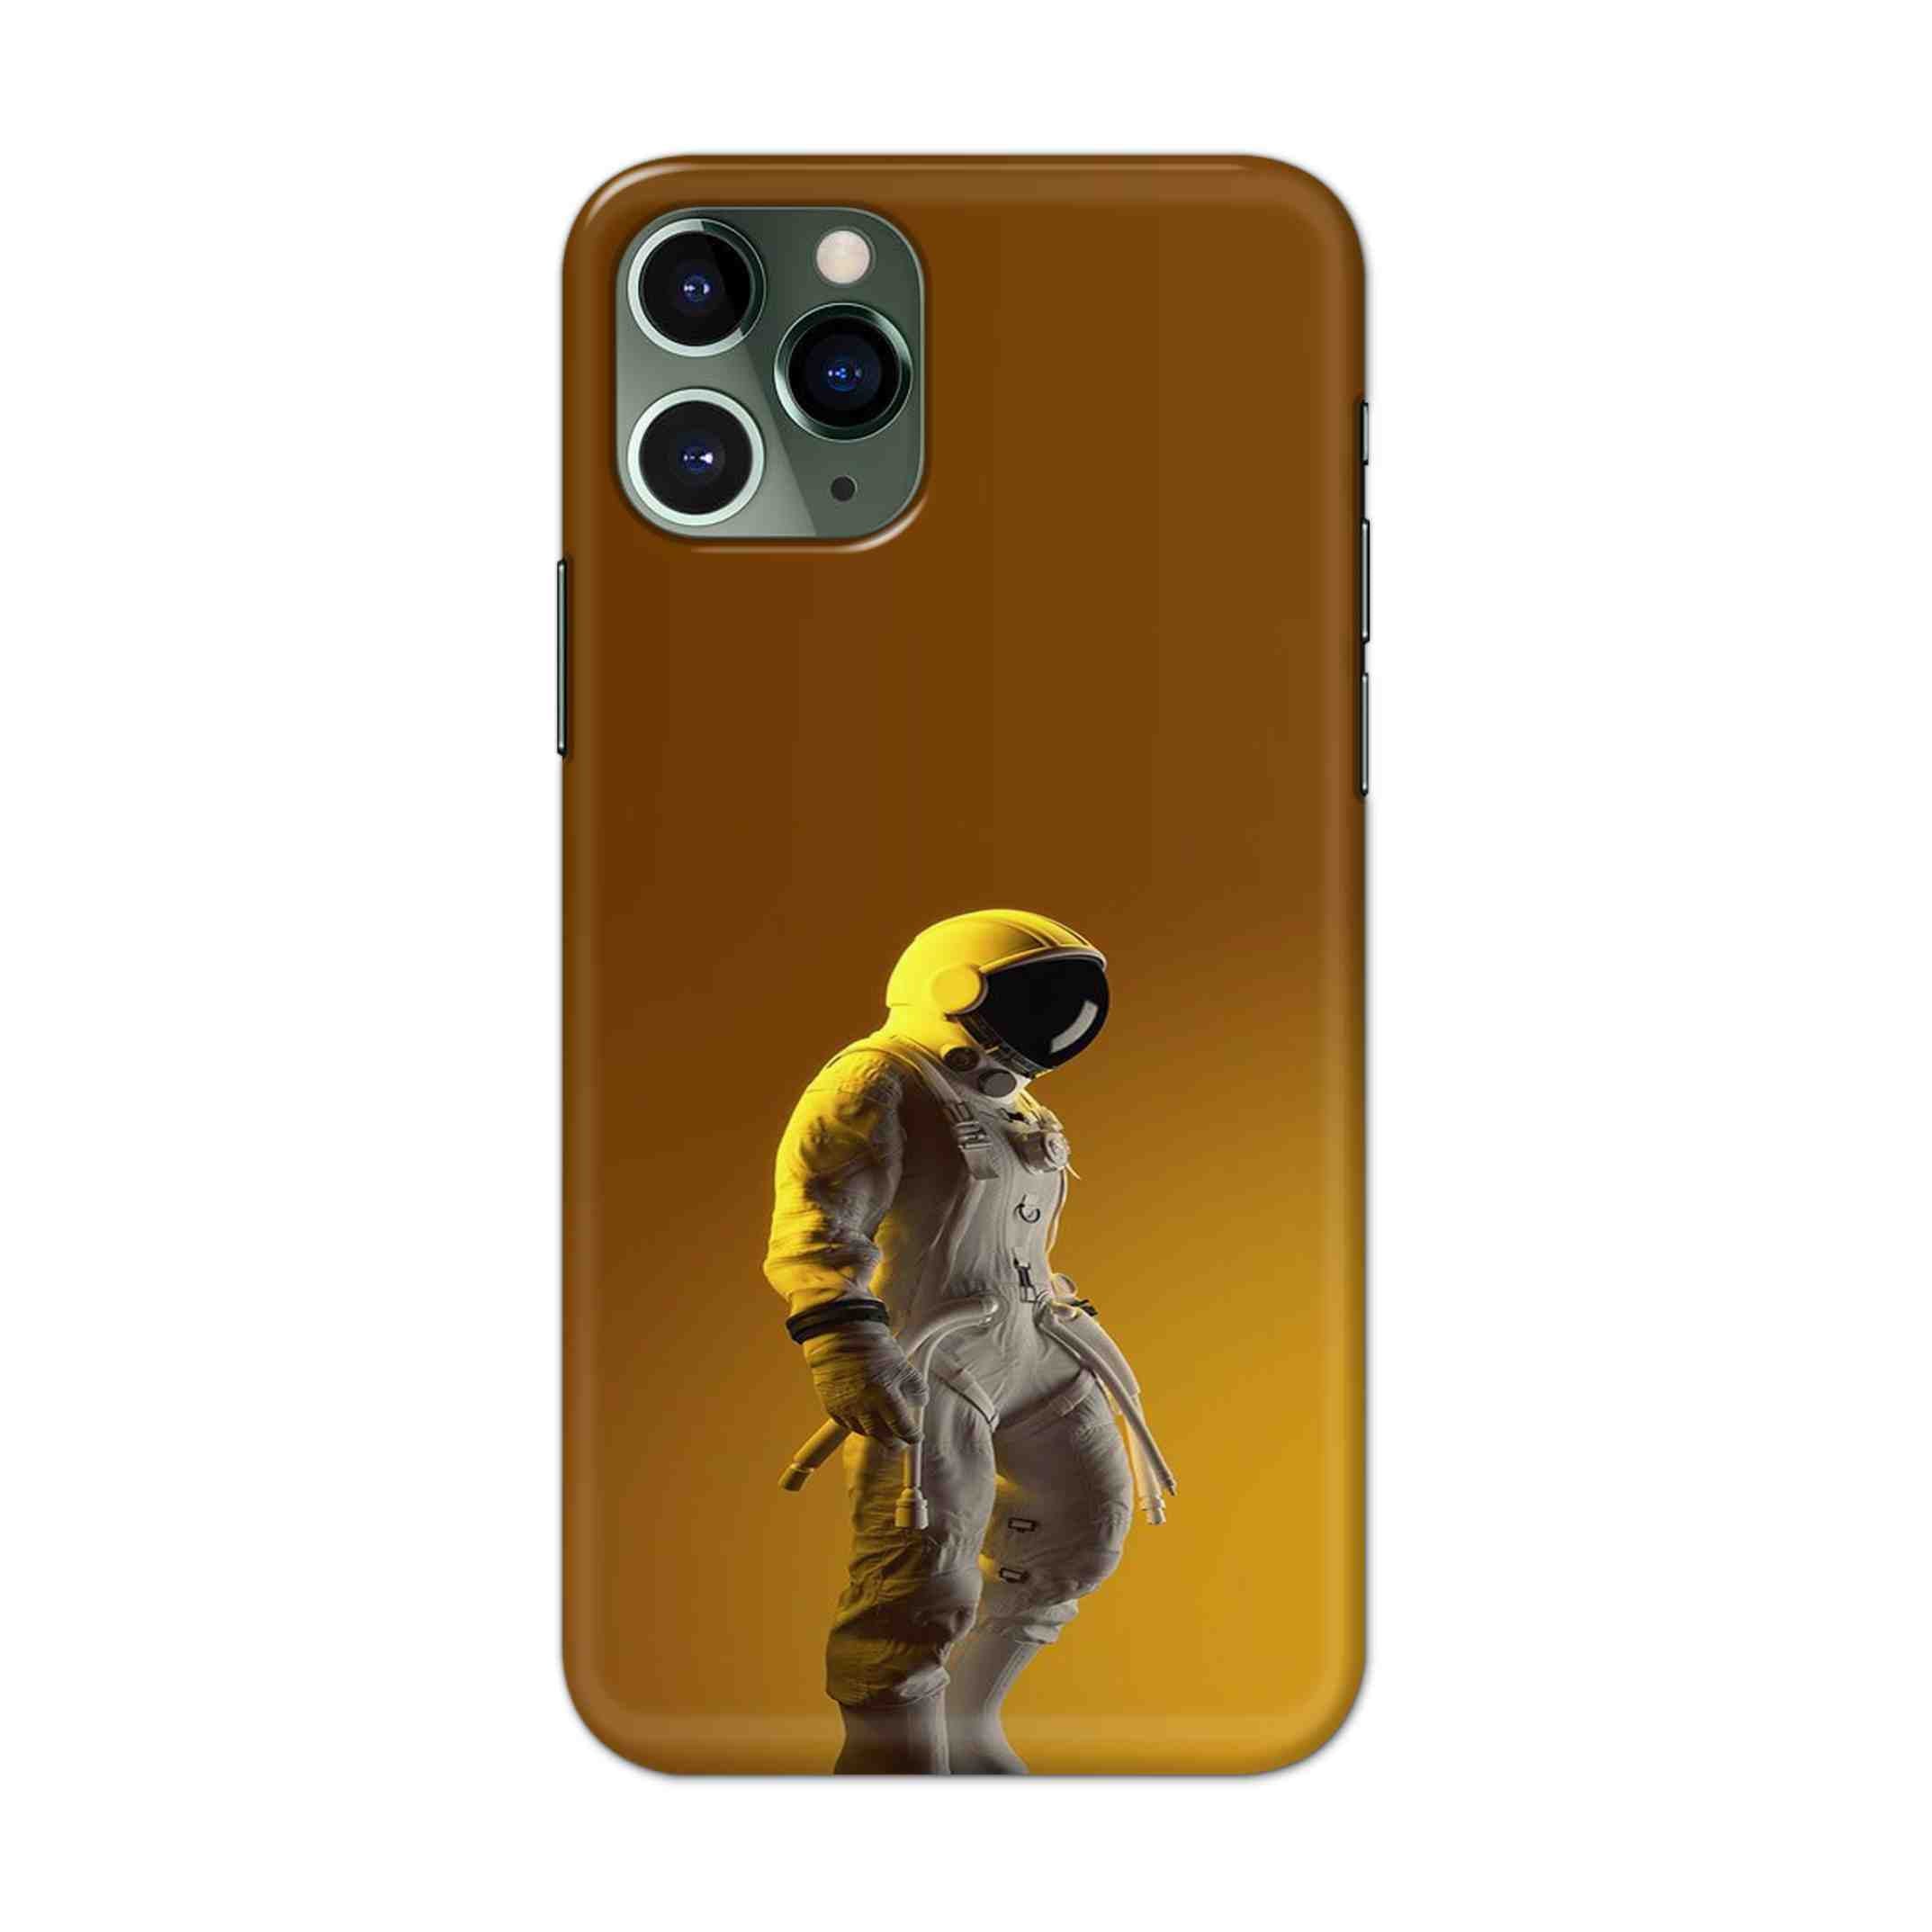 Buy Yellow Astranaut Hard Back Mobile Phone Case/Cover For iPhone 11 Pro Online